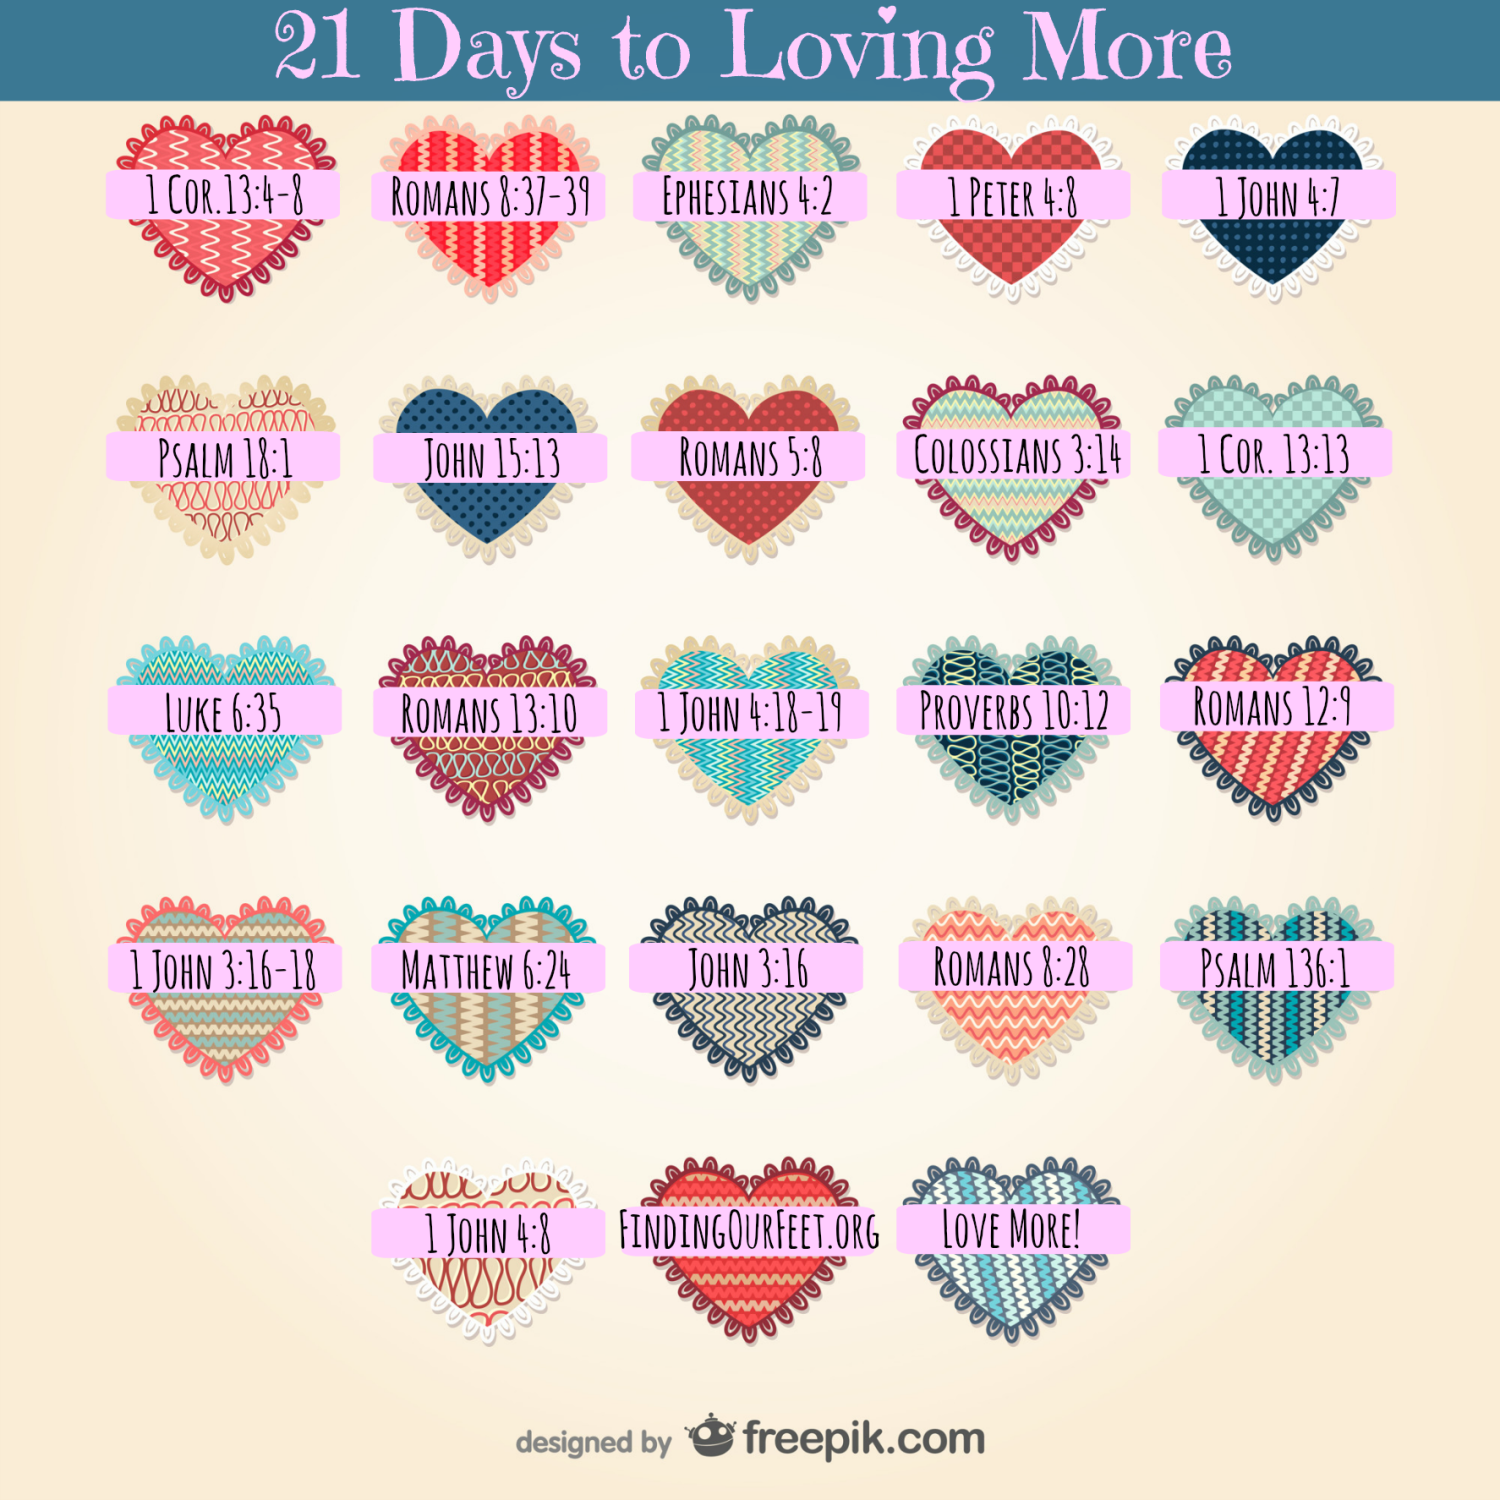 21 Days to Loving More